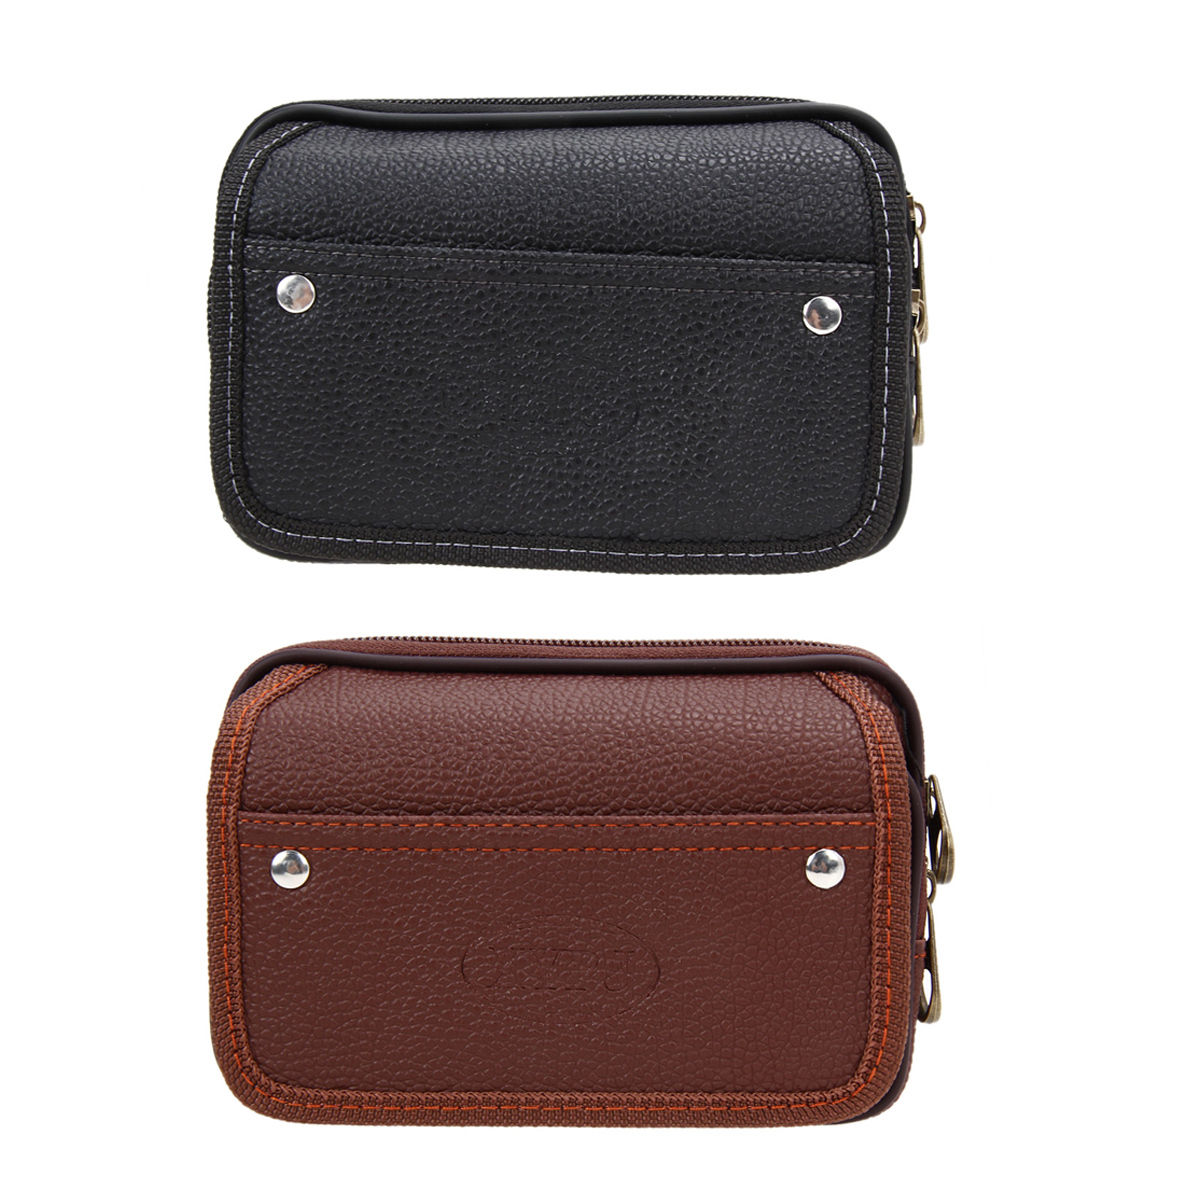 PU-Leather-Waist-Belt-Bag-Phone-Bag-Running-Wallet-Hip-Purse-Tote-Outdoor-Sports-Travel-Camping-1085218-4